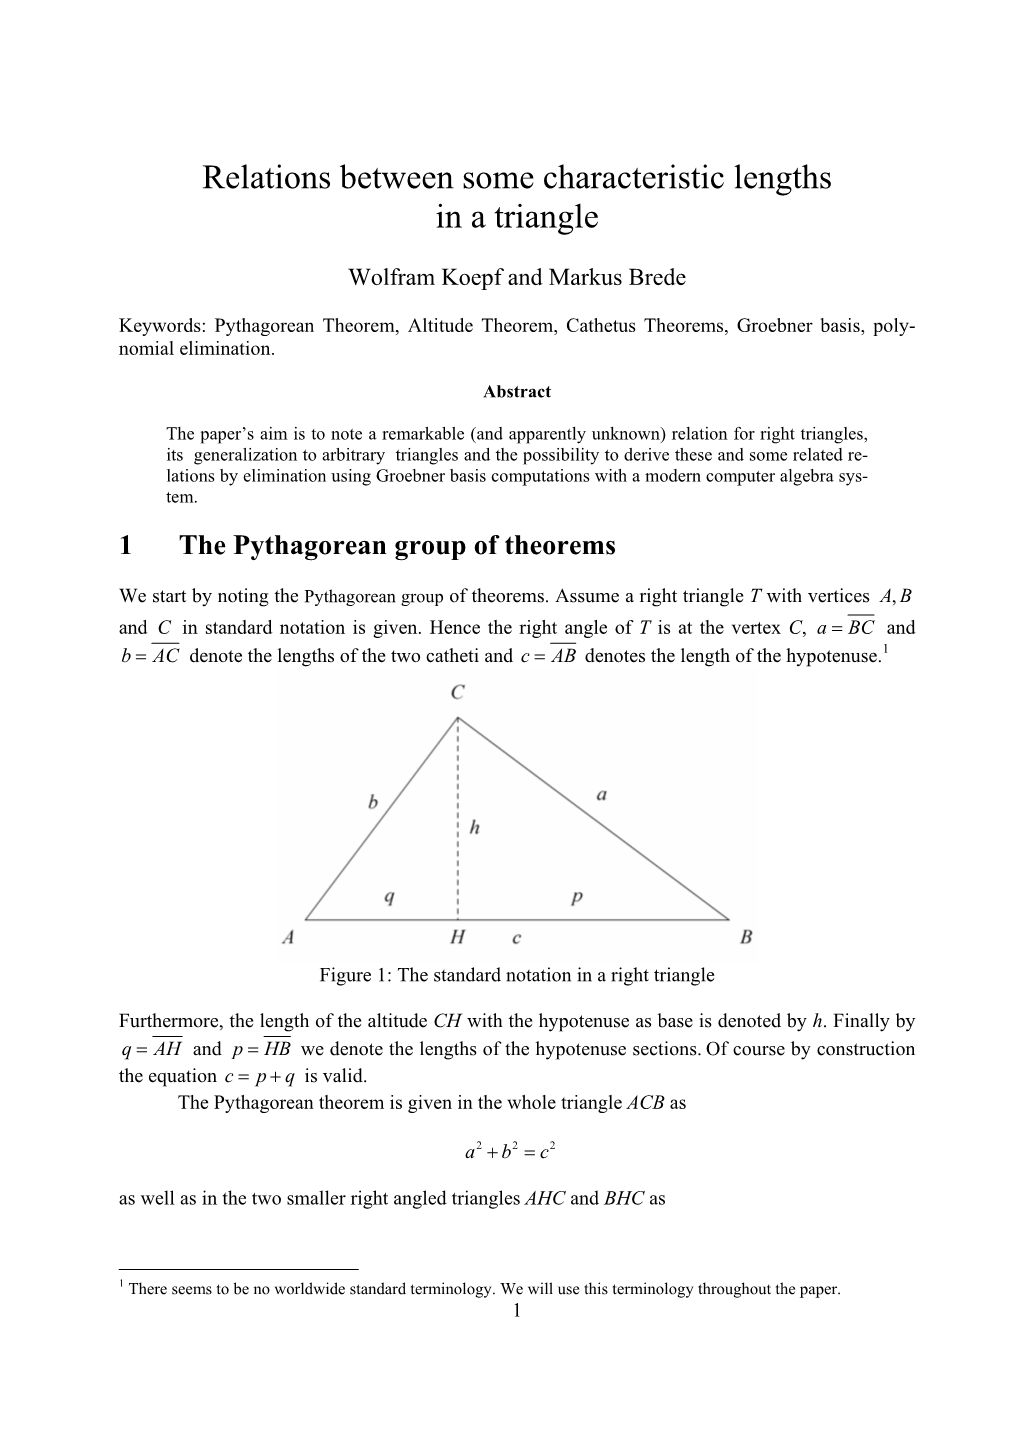 Relations Between Some Characteristic Lengths in a Triangle